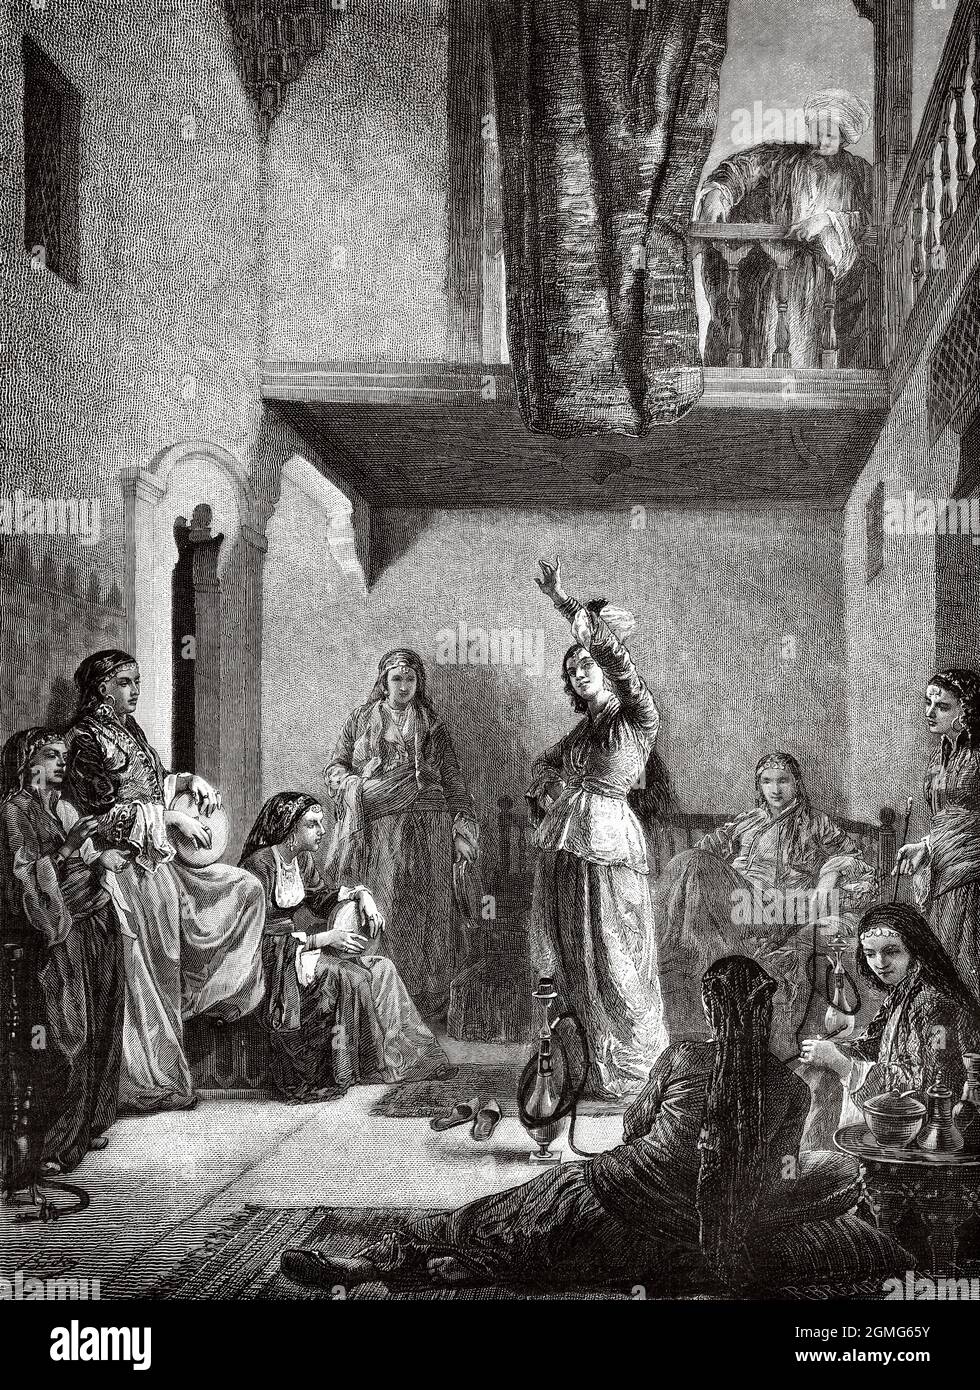 Life in an Ottoman harem, painting by A Bida. Old 19th century engraved illustration from La Ilustración Artística 1882 Stock Photo